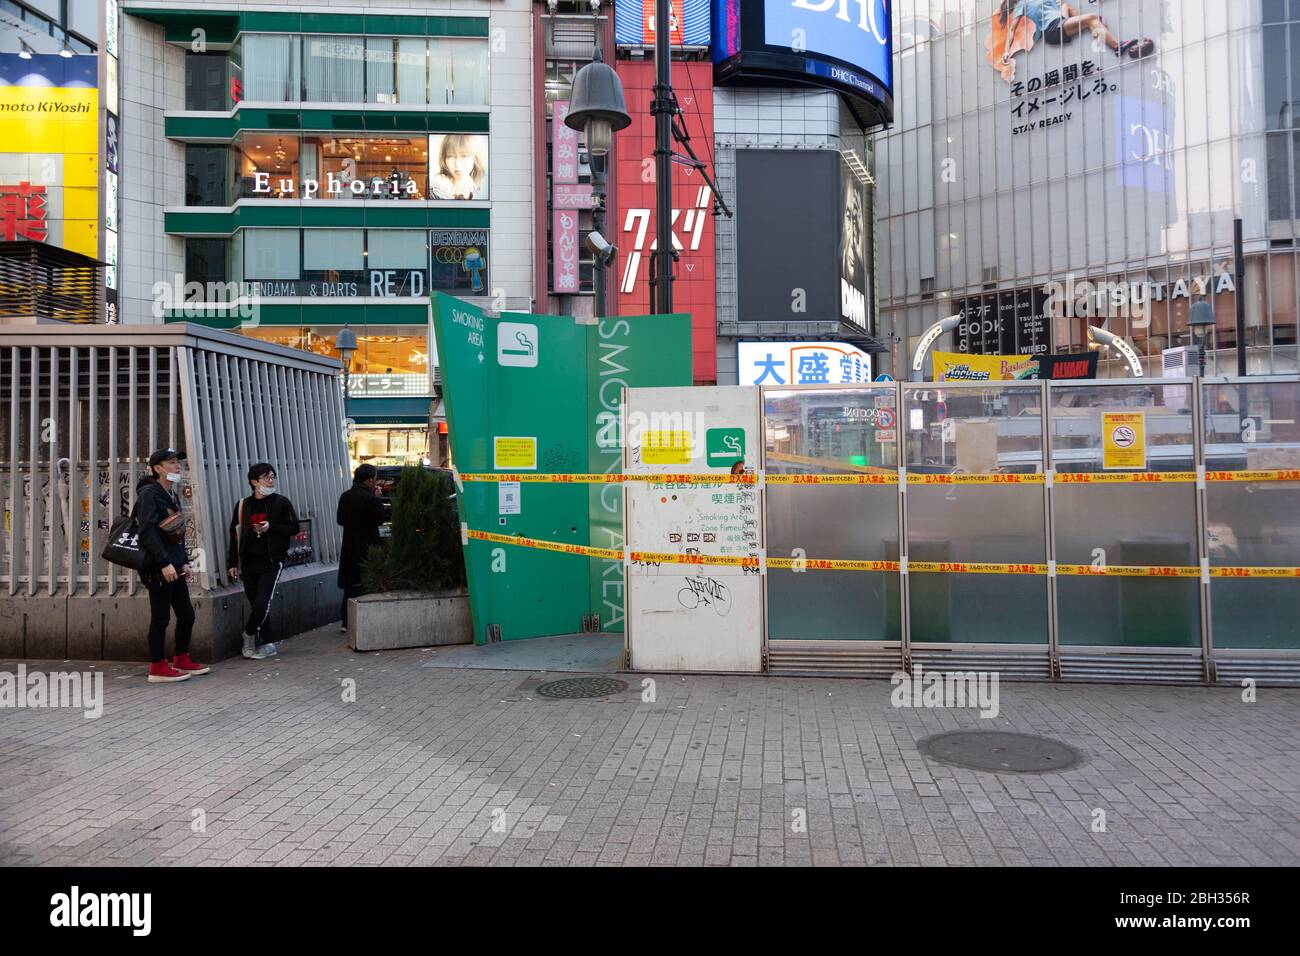 Smokers outside a smoking area that has been closed in order to prevent the spread of COVID-19 coronavirus, Shibuya, Tokyo, Japan, April 8, 2020. Photographer credit Niclas Ericsson. () Stock Photo